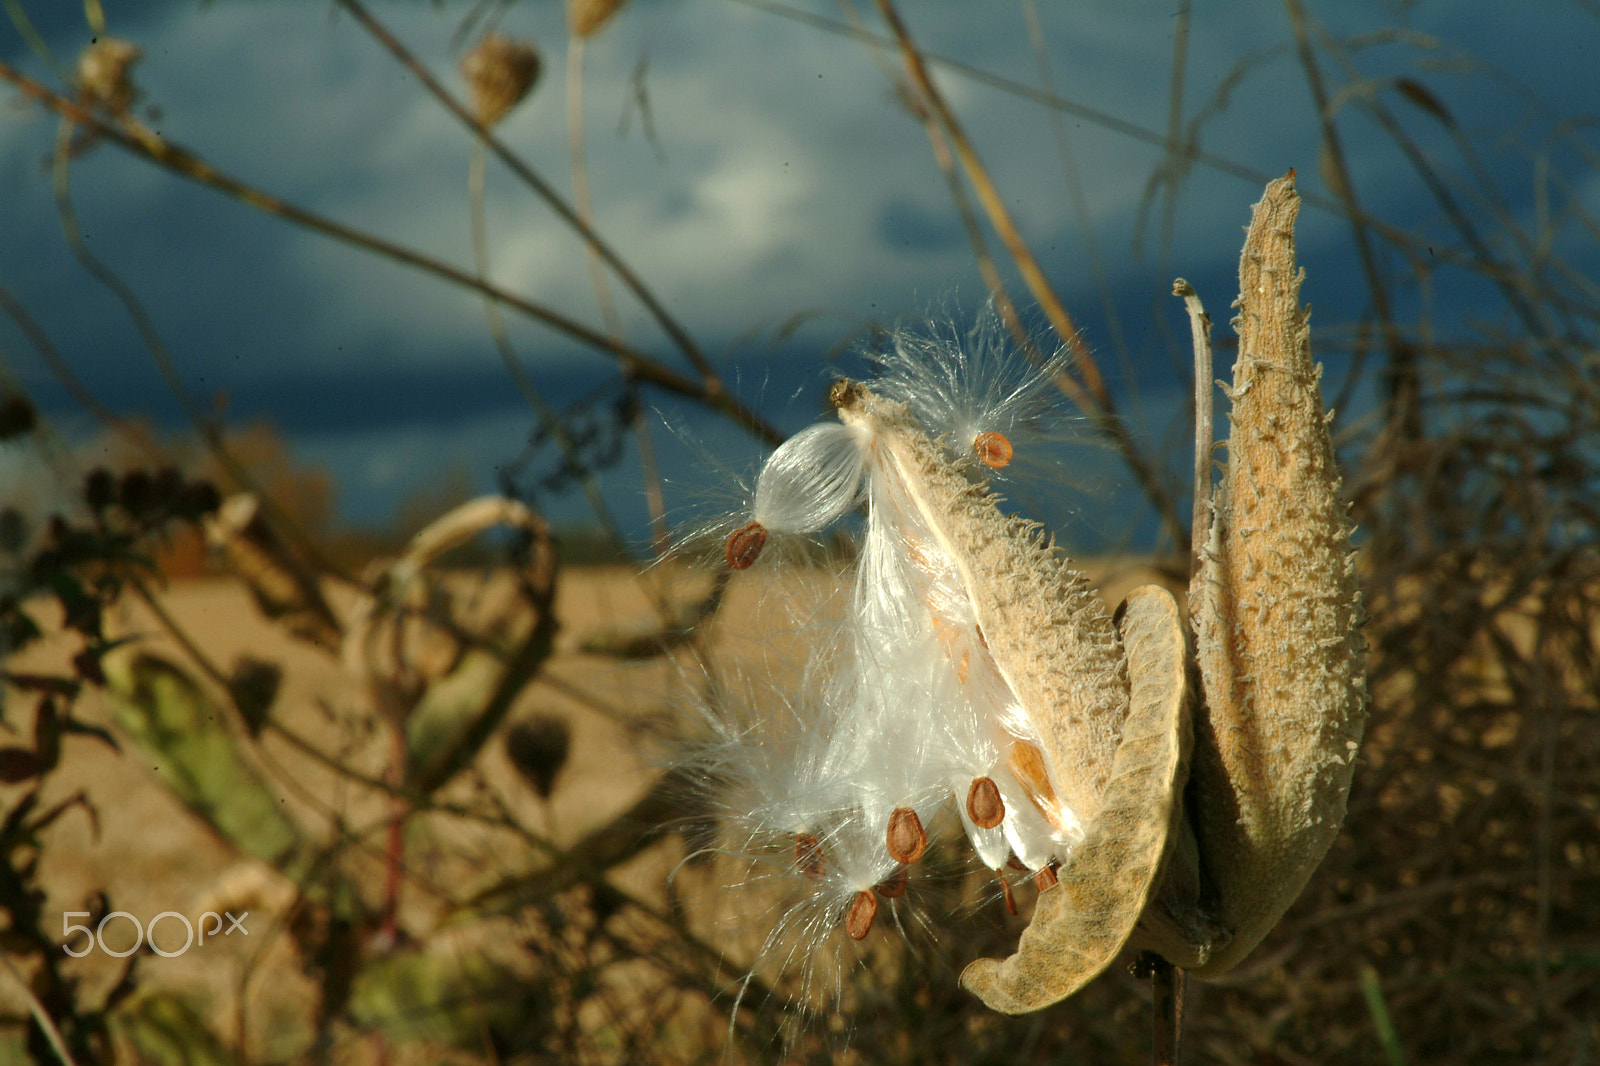 Fujifilm FinePix S2 Pro sample photo. Milkweed seeds in fall in a field against a dark s photography